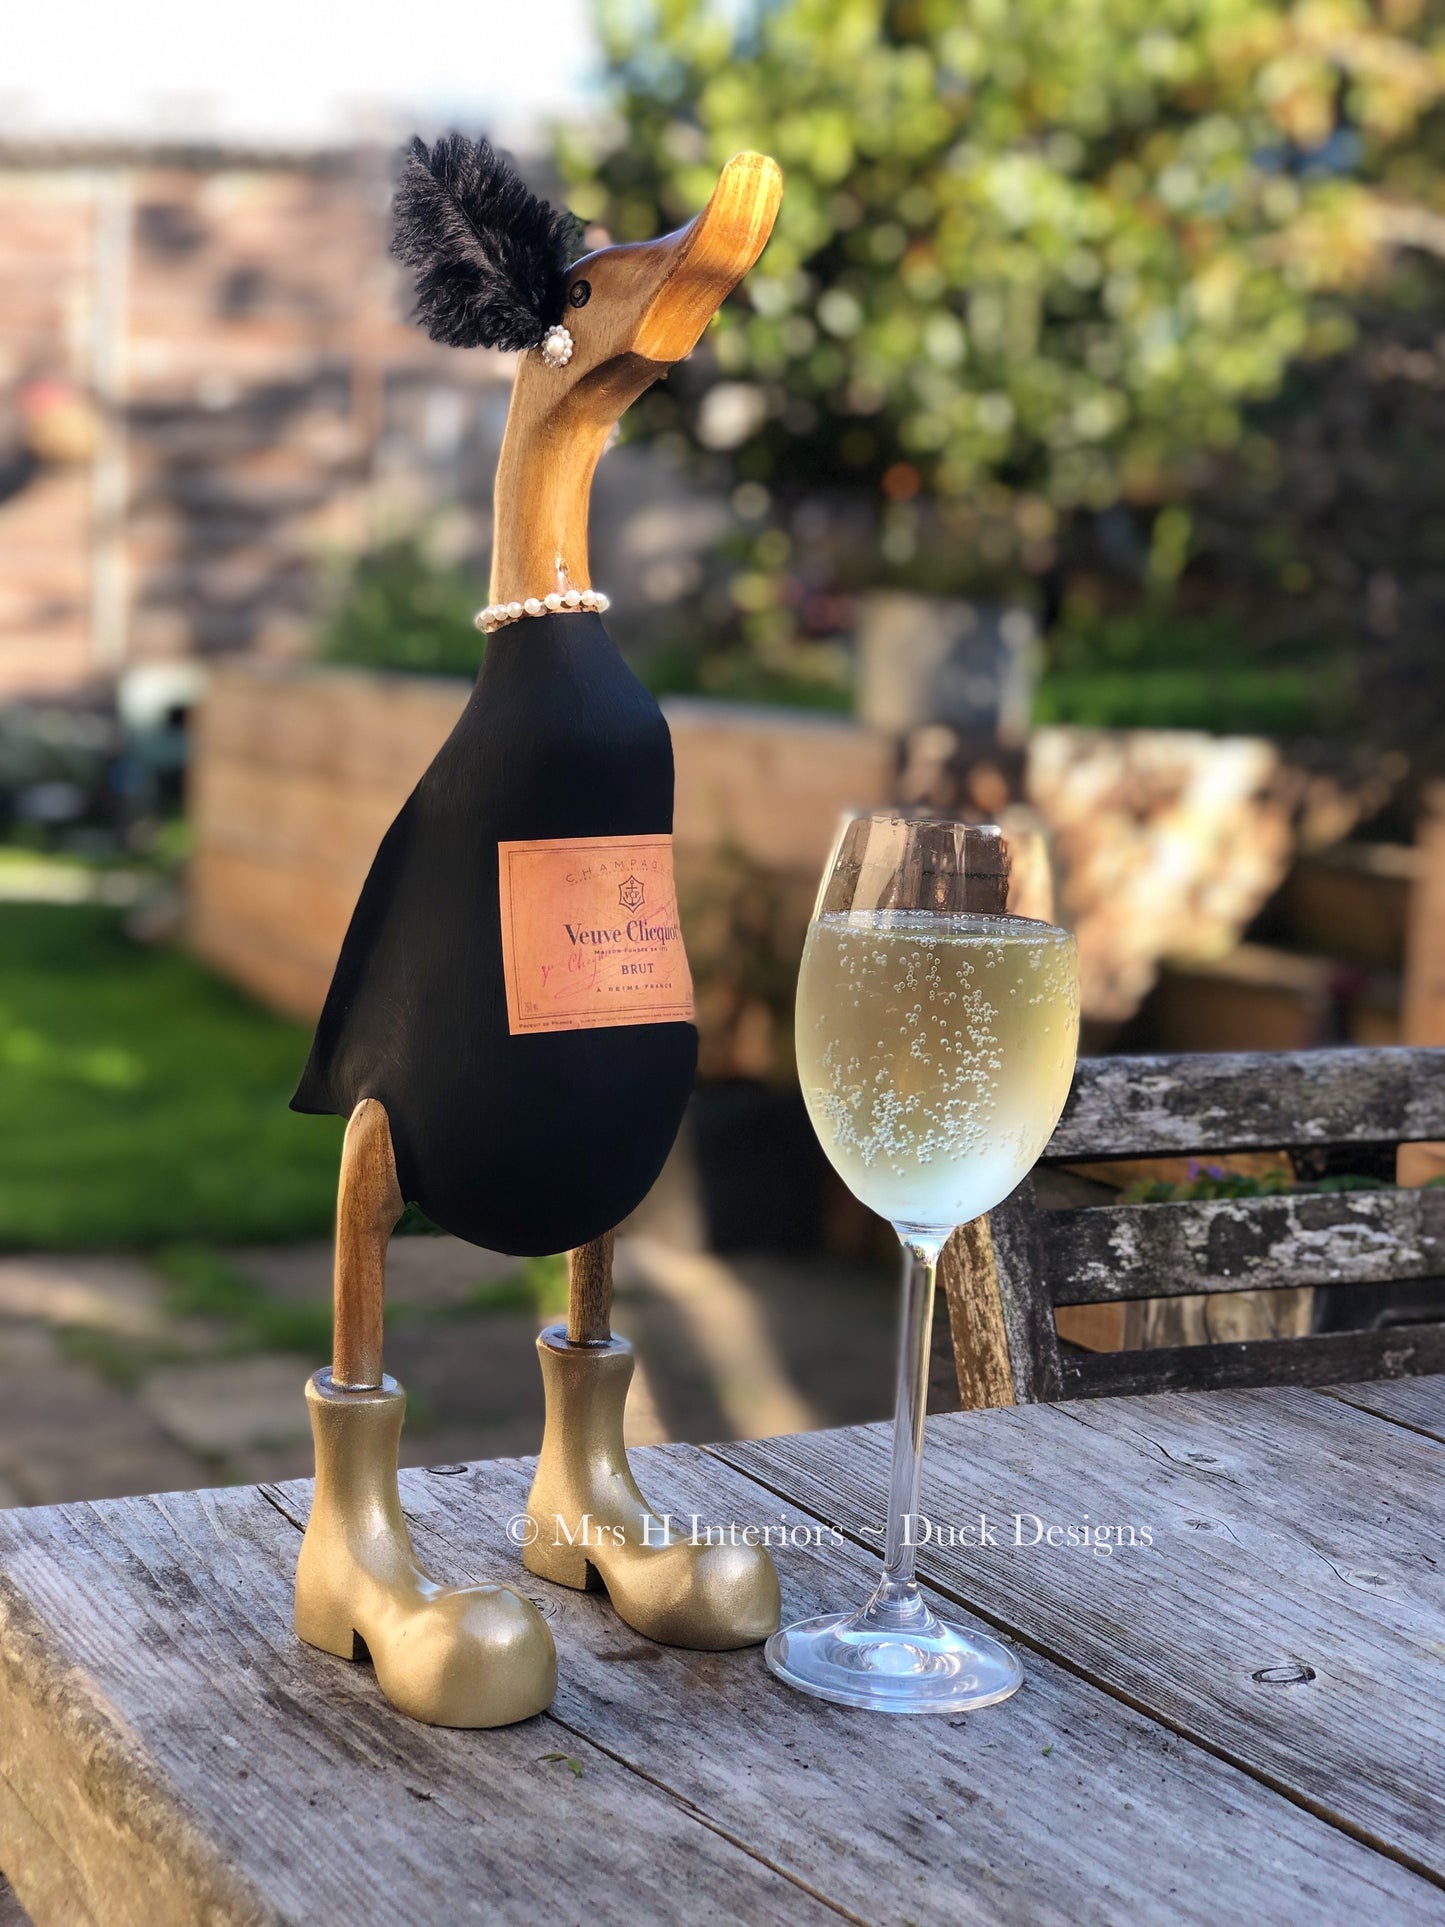 Fizzy Pop Friday - Decorated Wooden Duck in Boots by Mrs H the Duck Lady